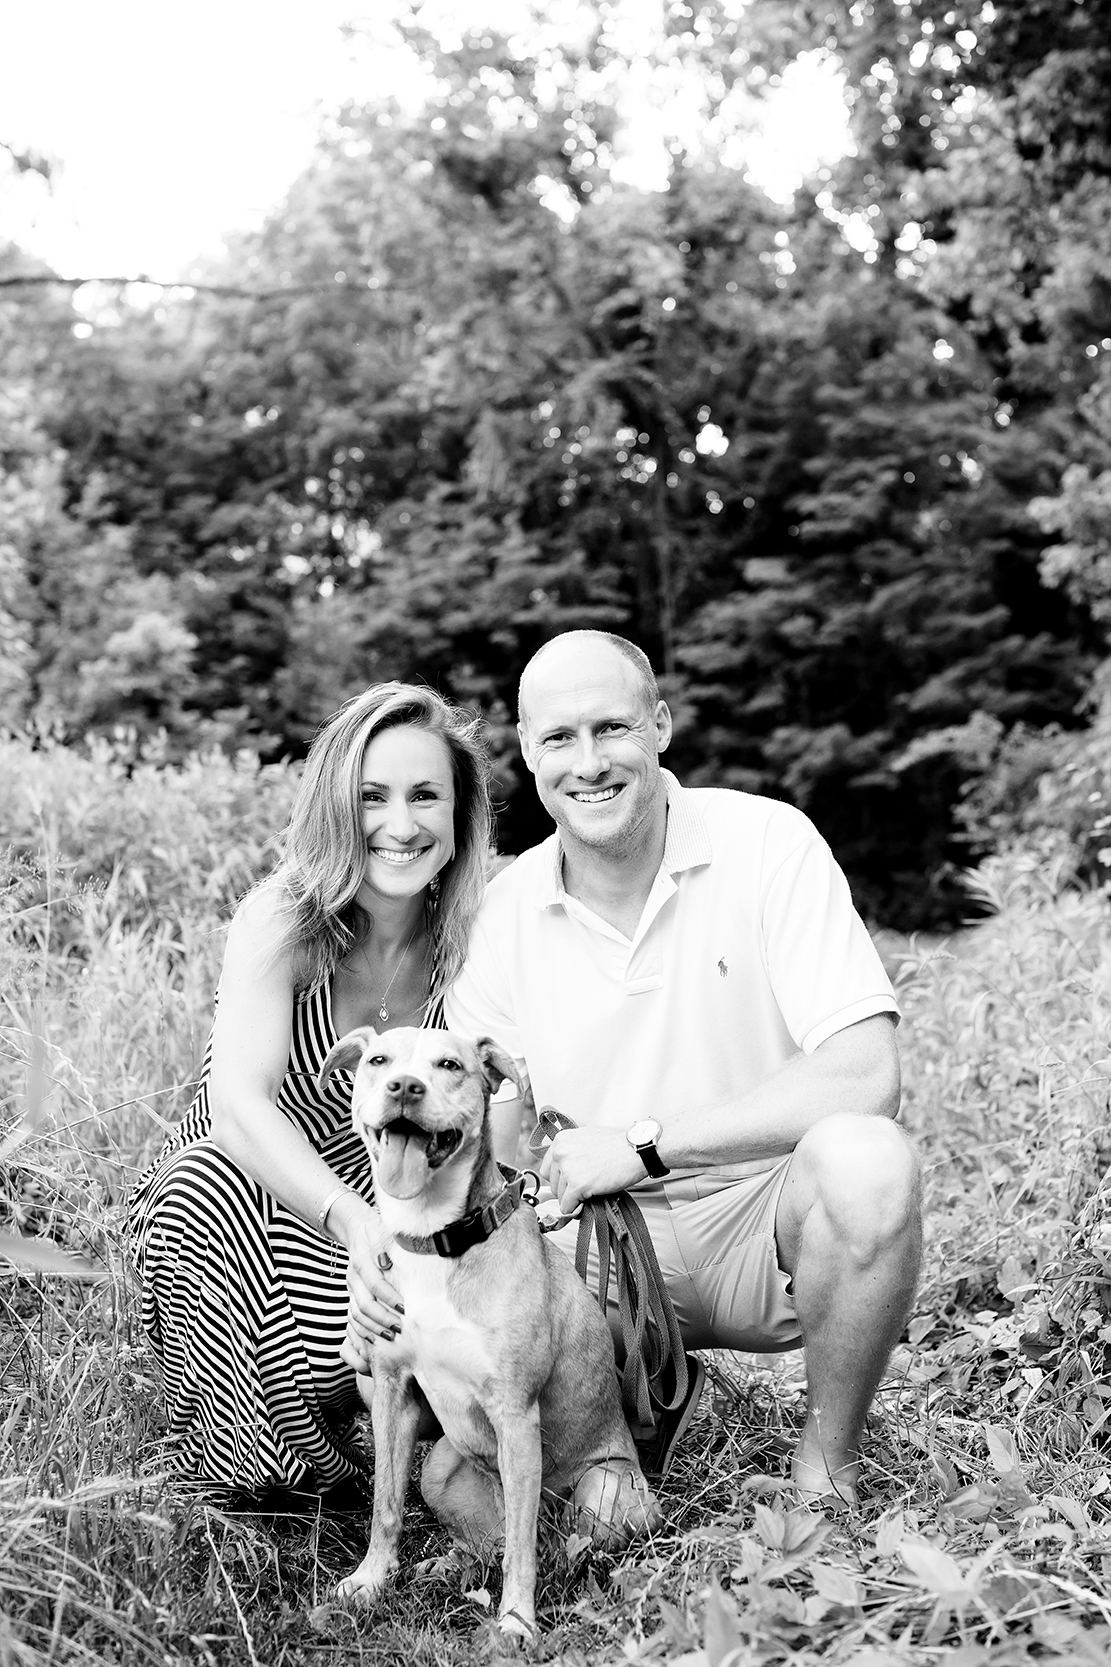 Lauren  Wills James River and Libby Hill Engagement - Image Property of www.j-dphoto.com